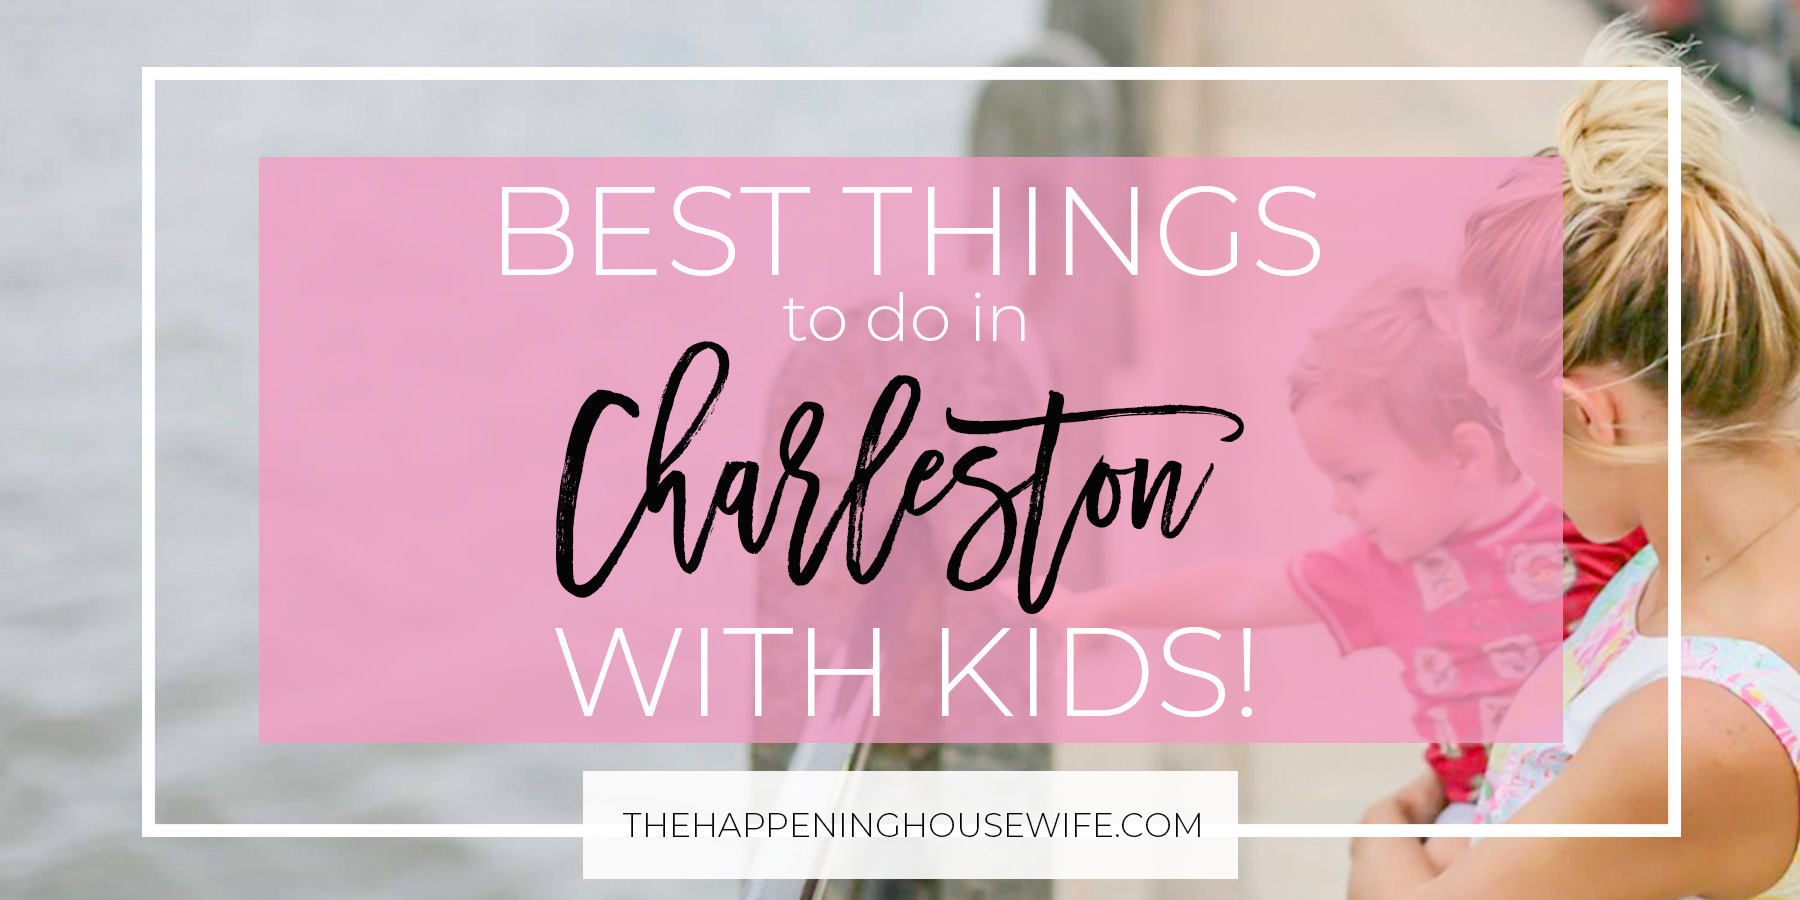 BEST THINGS TO DO IN CHARLESTON WITH KIDS!